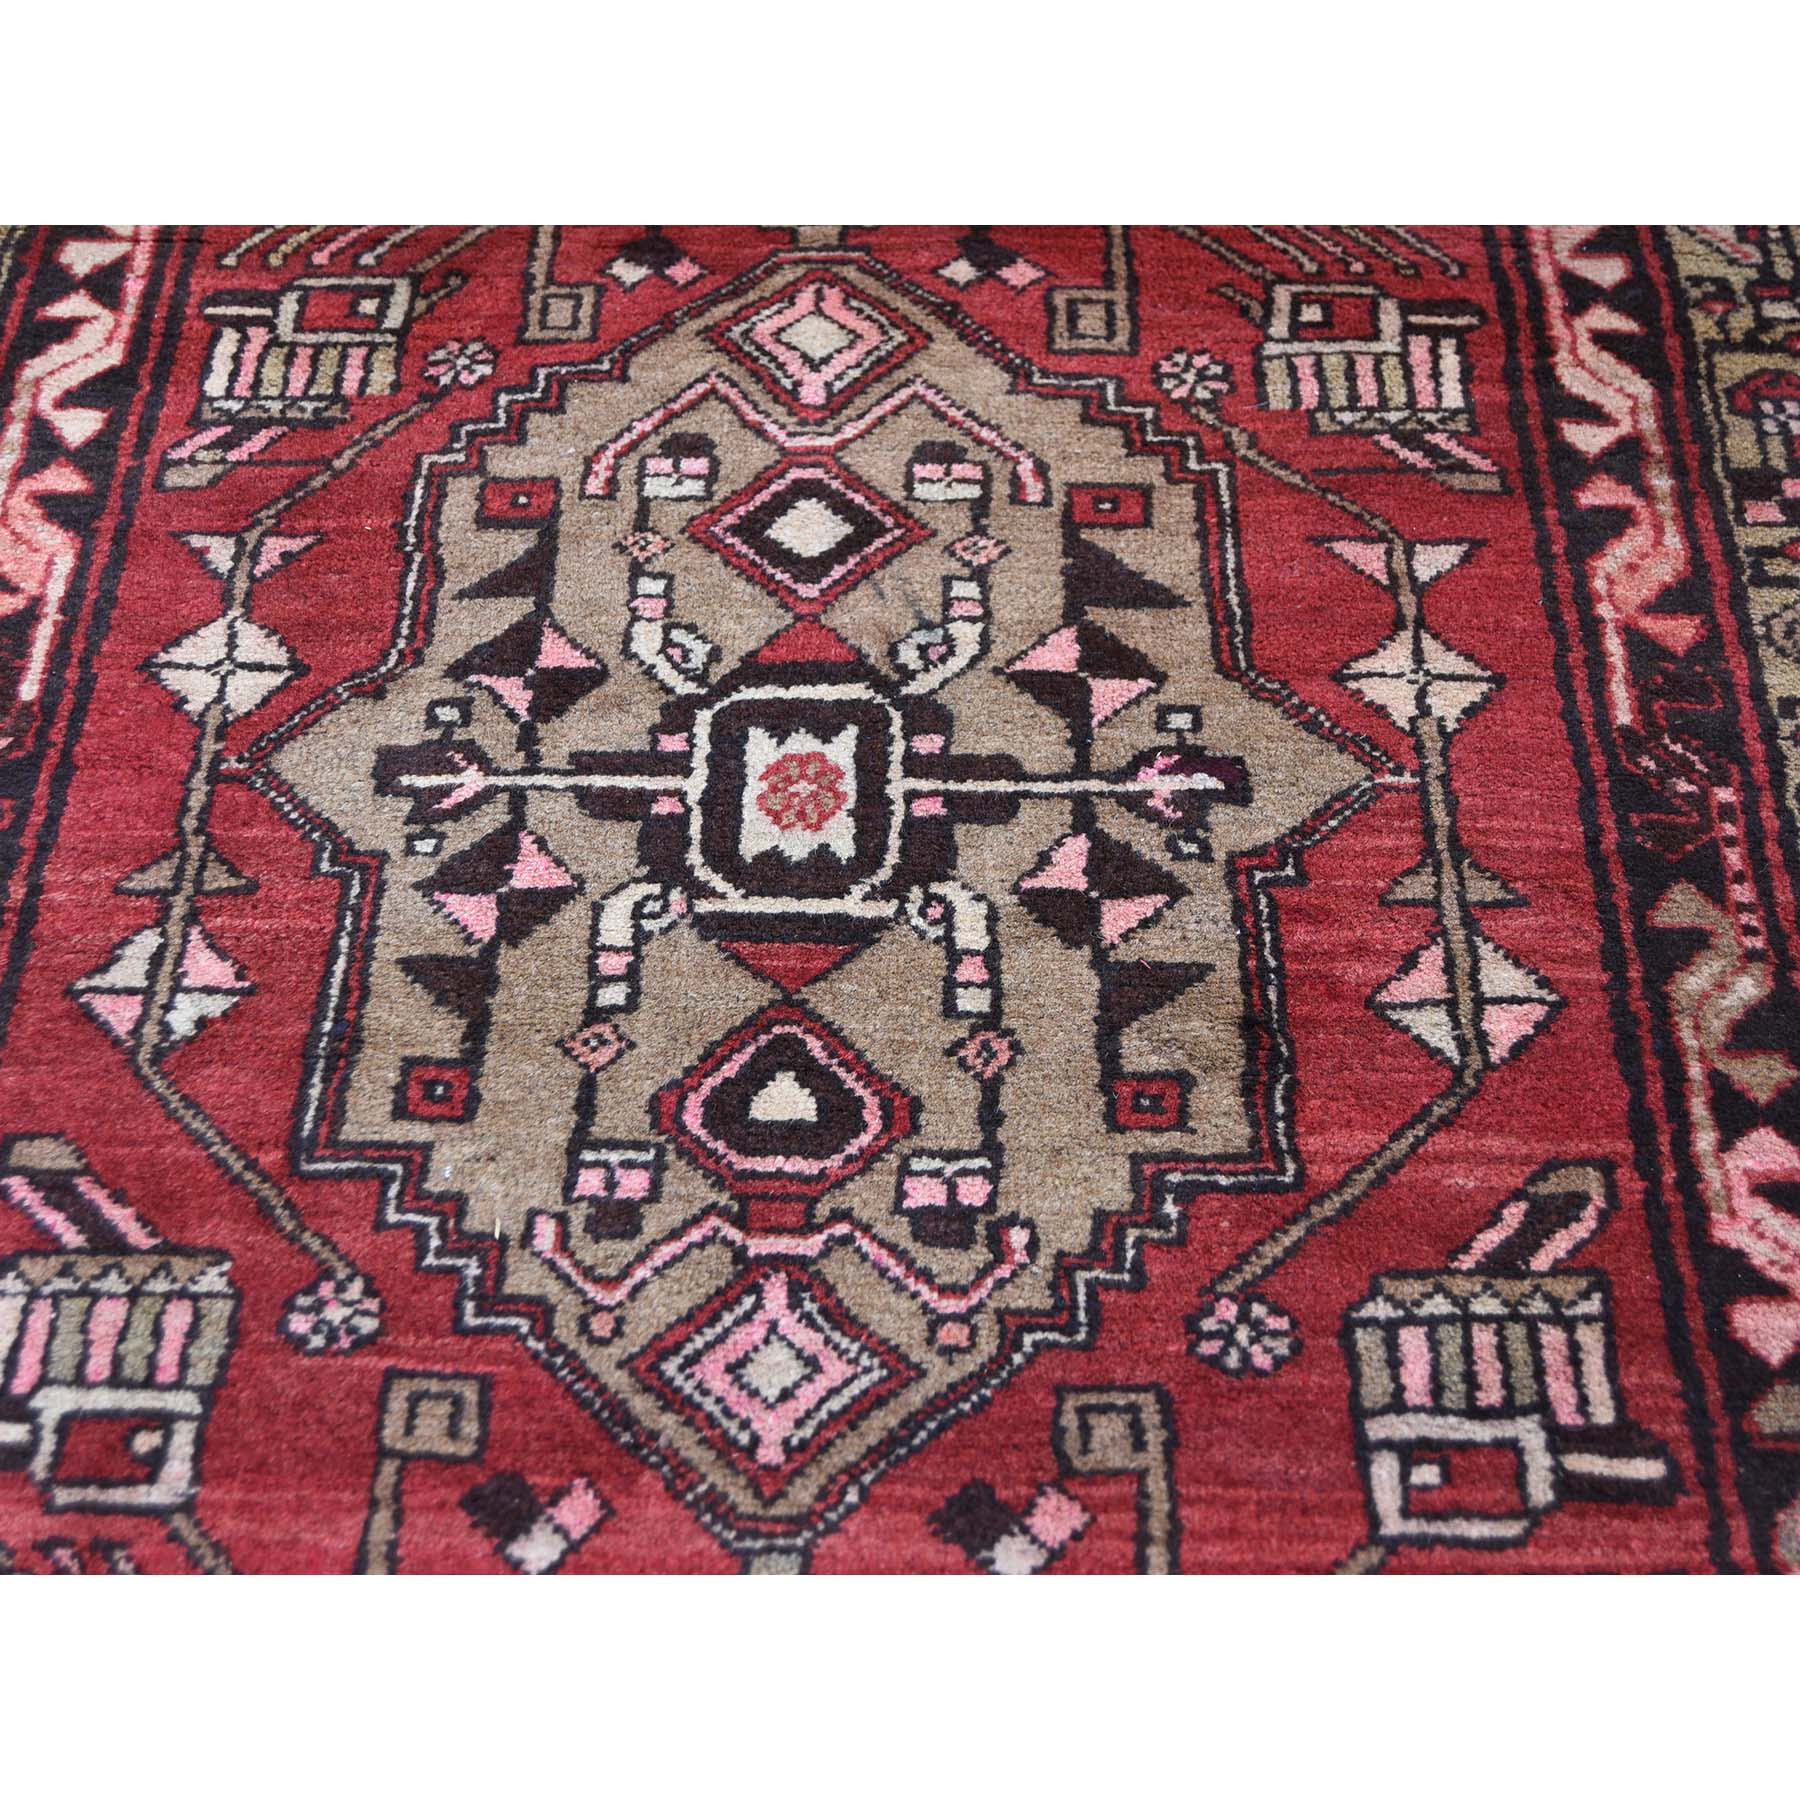 3-4 x13- Red Vintage North West Persian Bohemian Runner Pure Wool Hand-Knotted Oriental Rug 